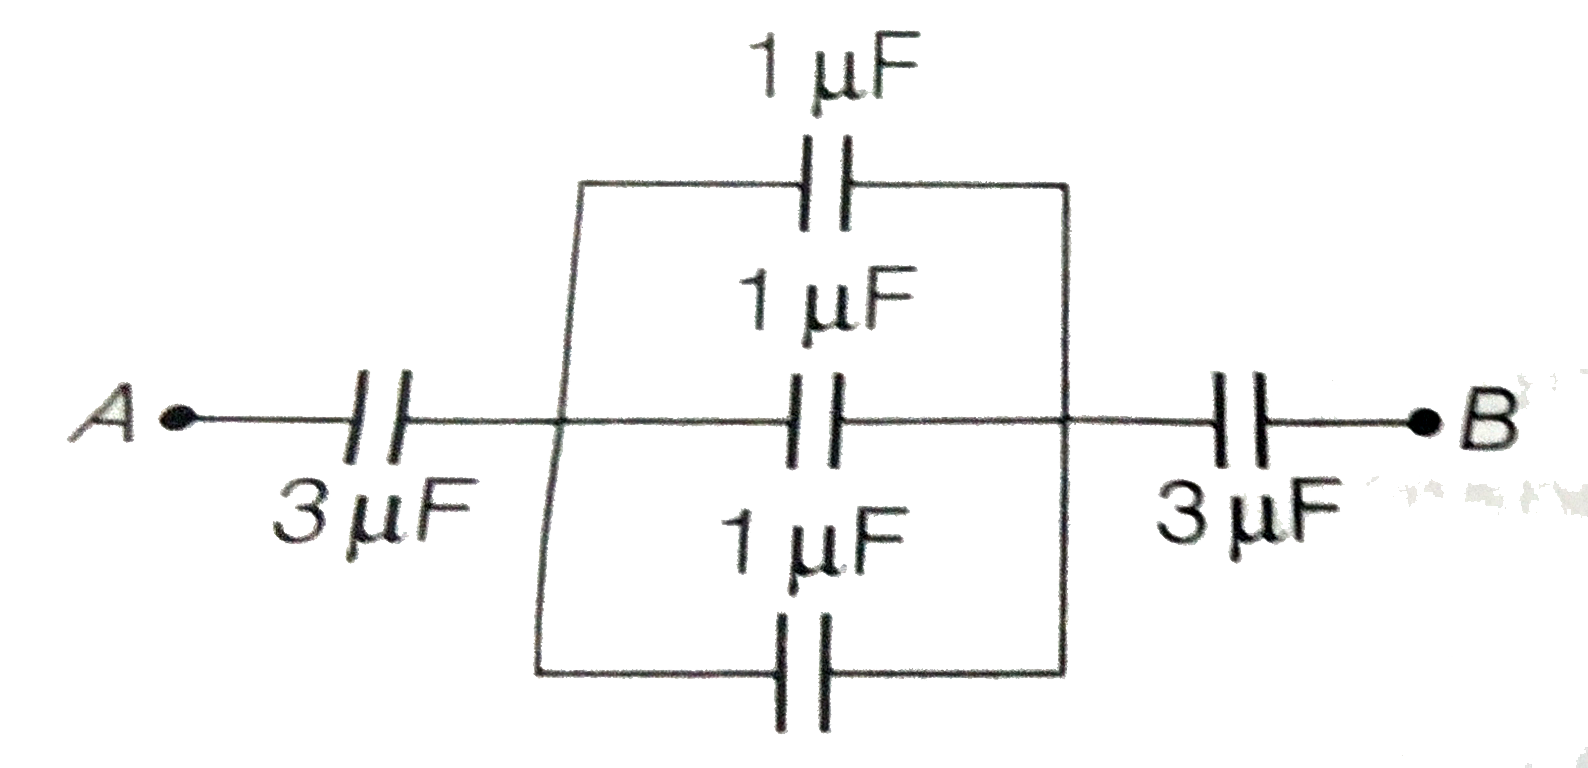 The equivalent capacitance for the combination shown in figure will